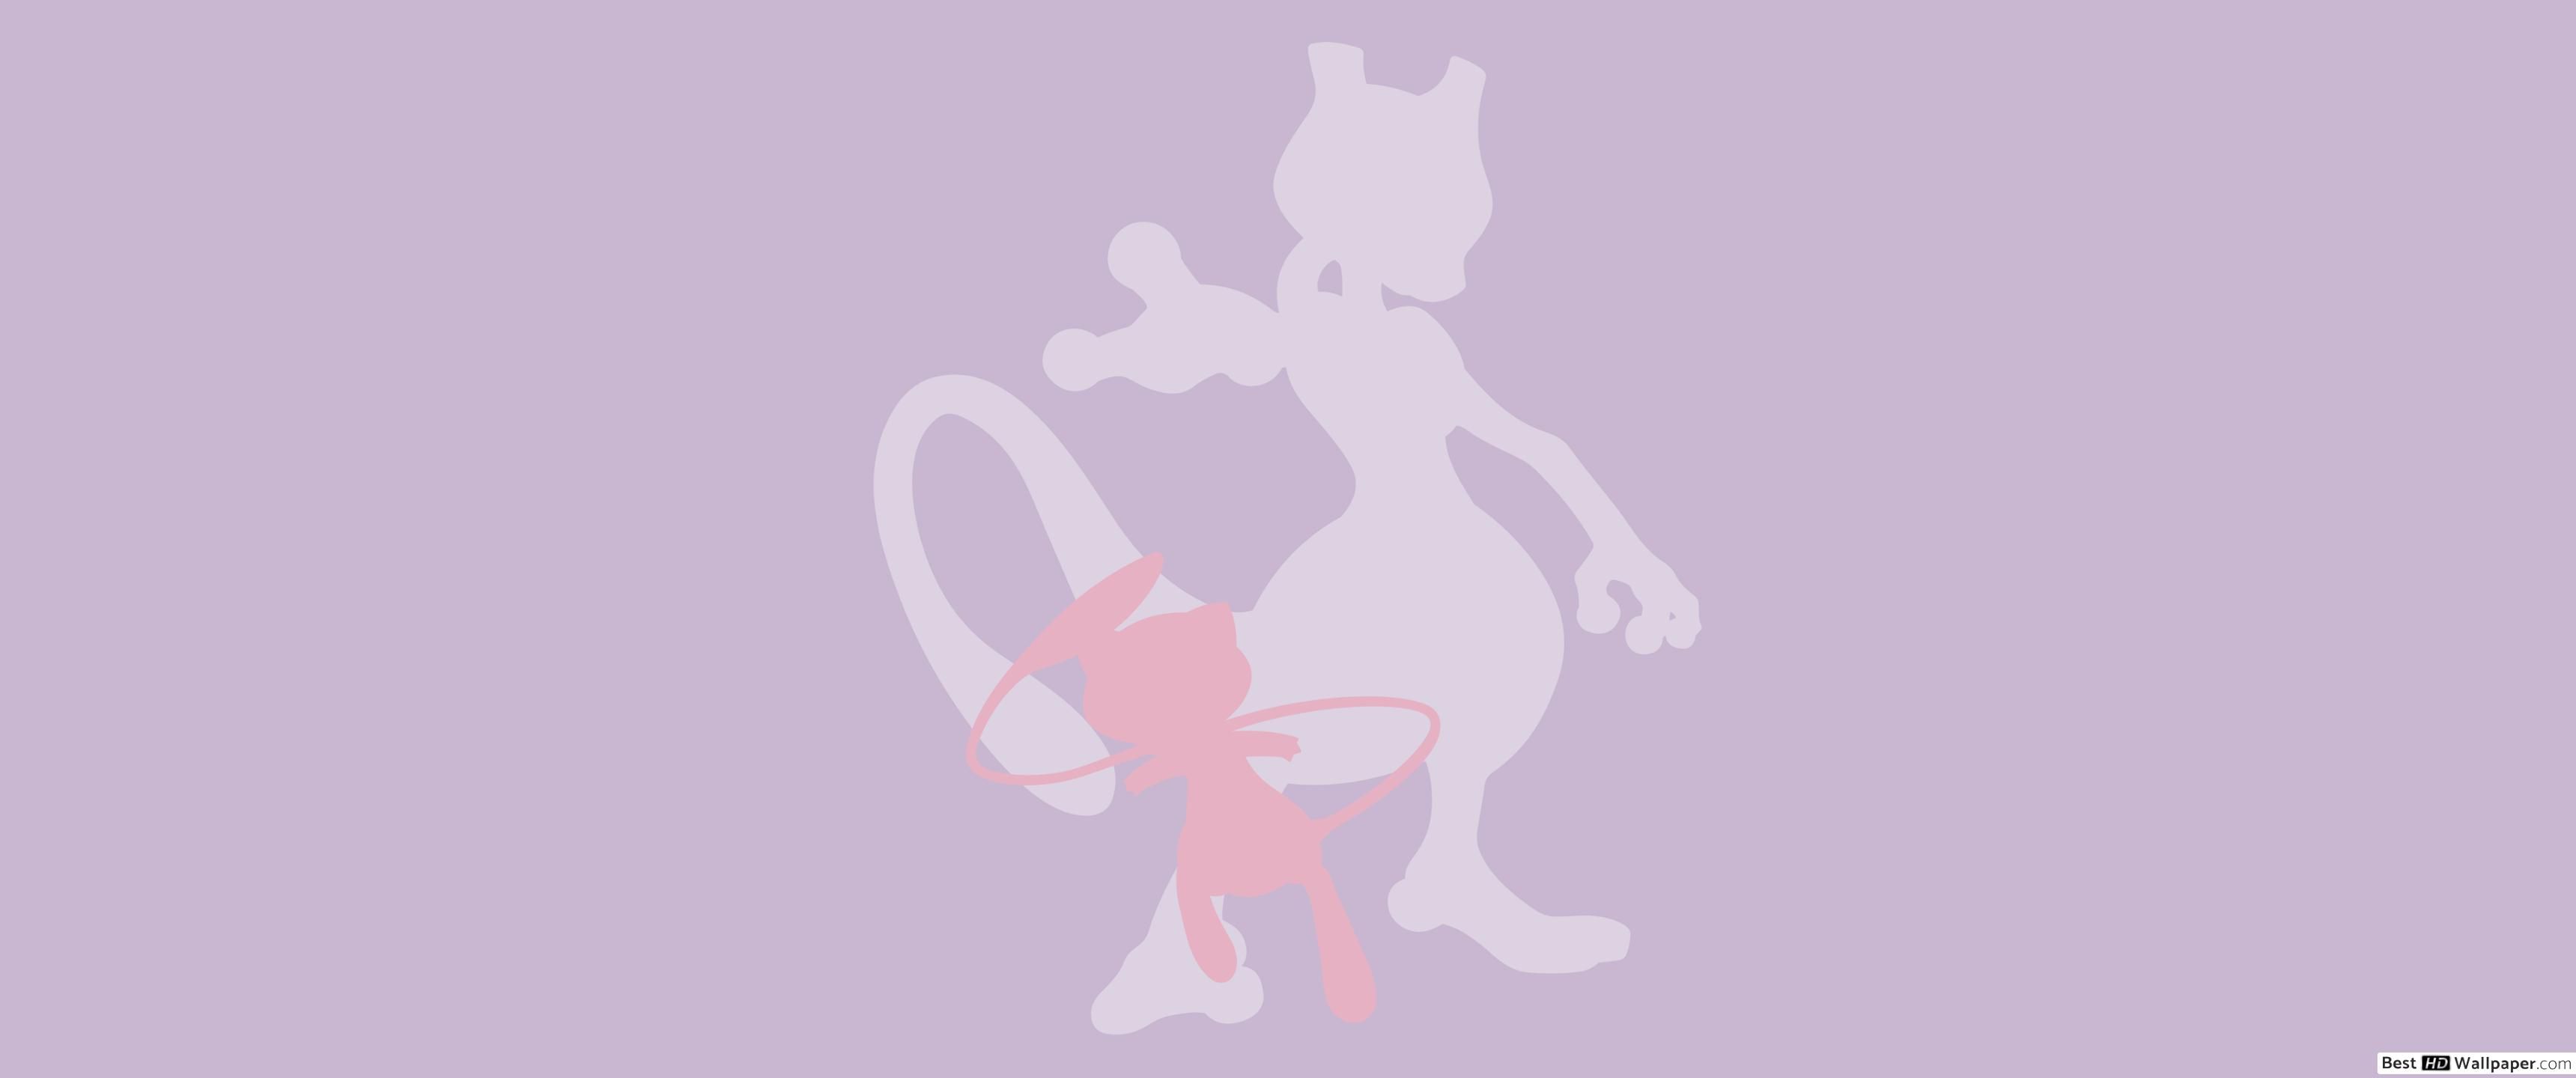 Mew and Mewtwo of Pokemon HD wallpaper download